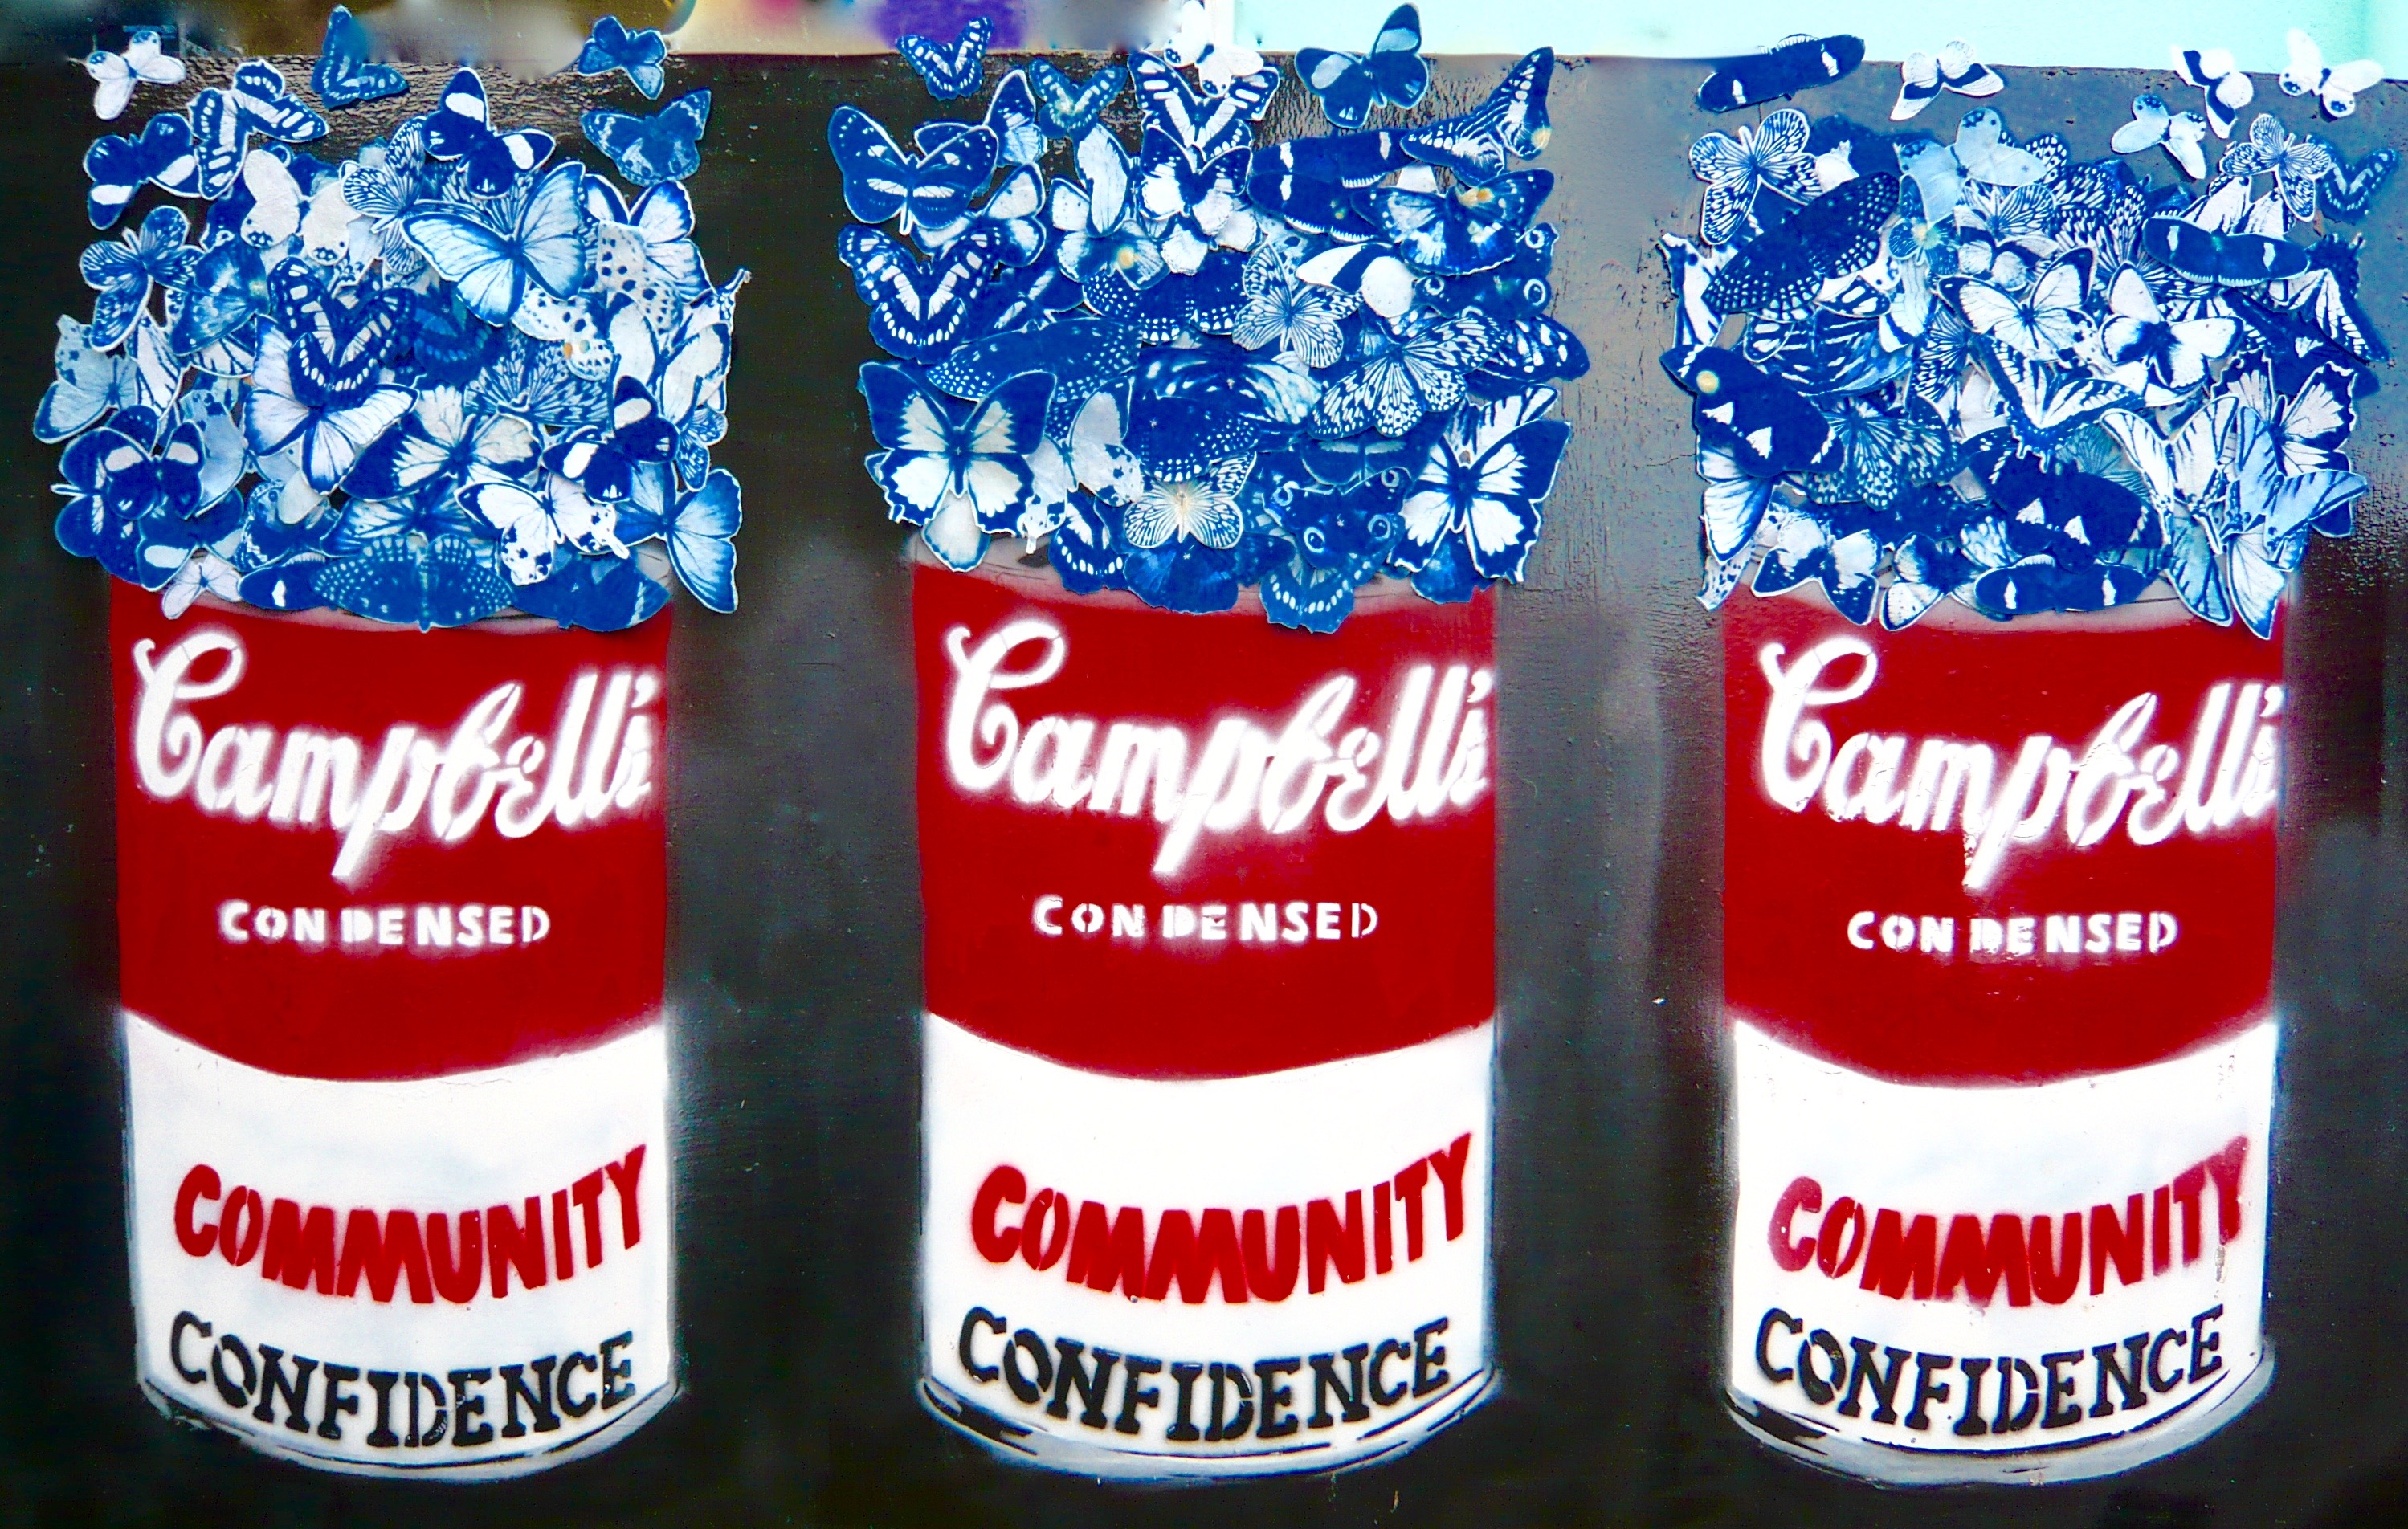 Campbell's Condensed Community Confidence